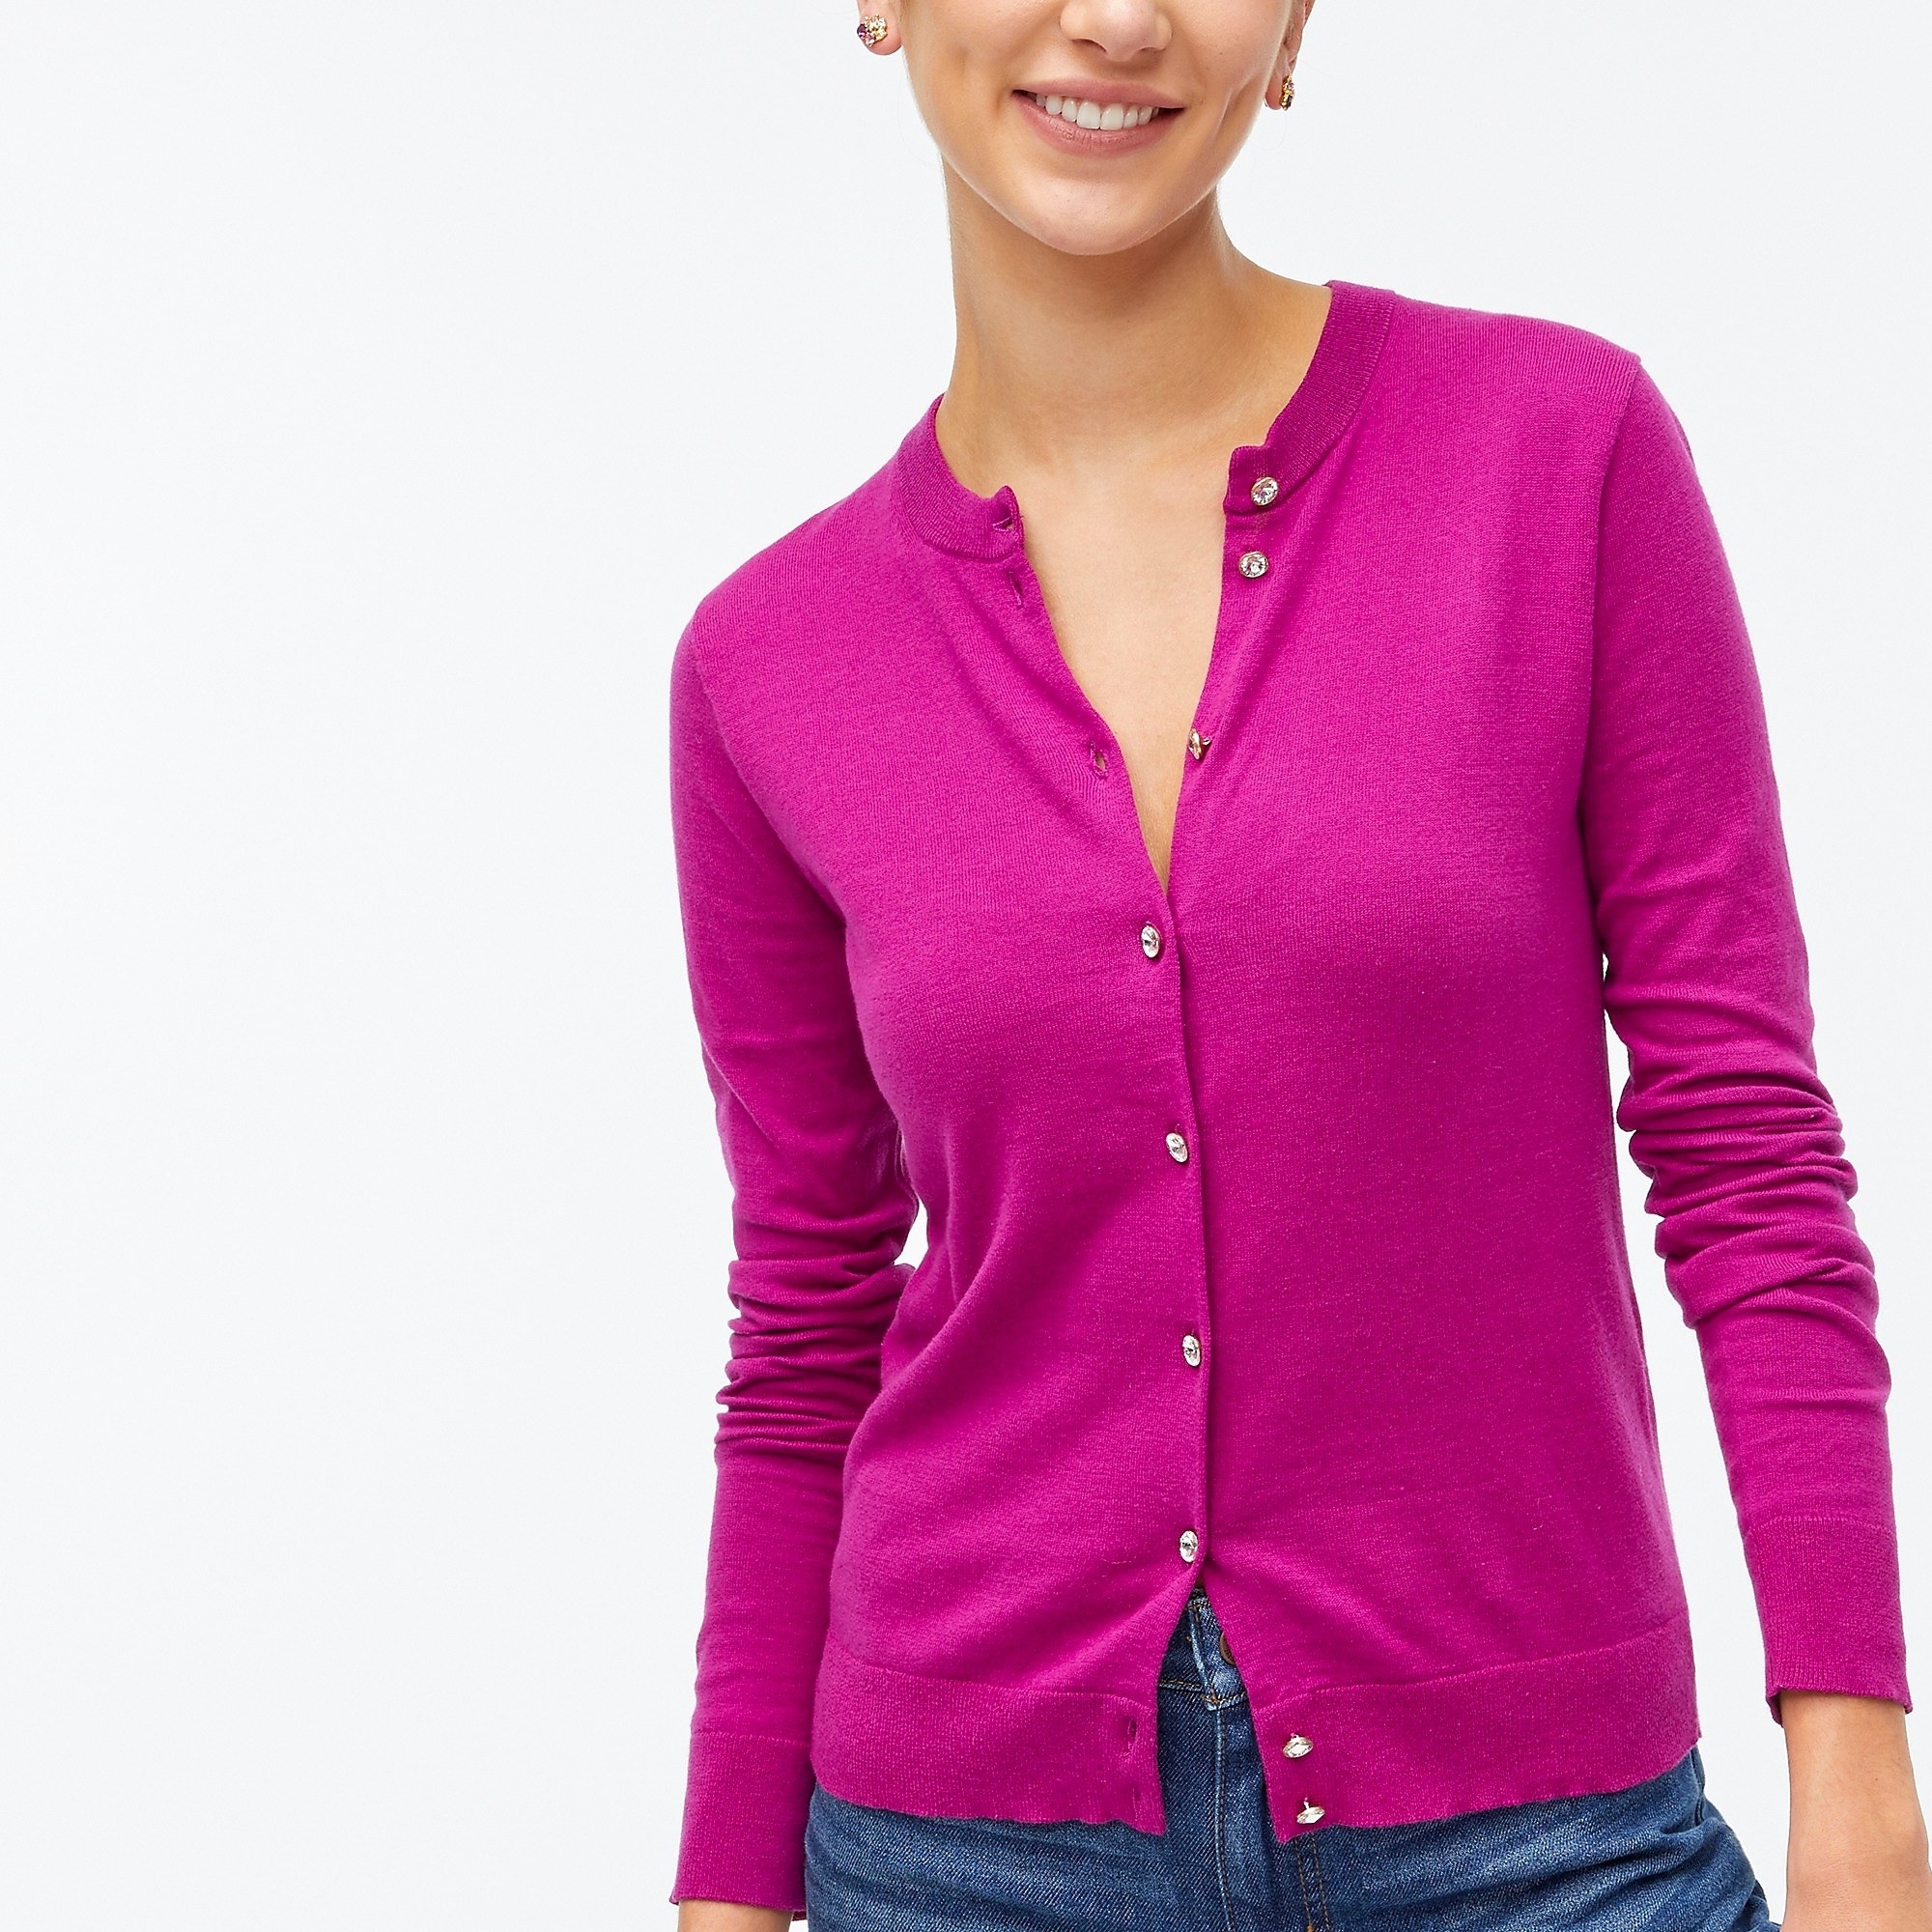 Model wearing a magenta cardigan with silver and diamond buttons